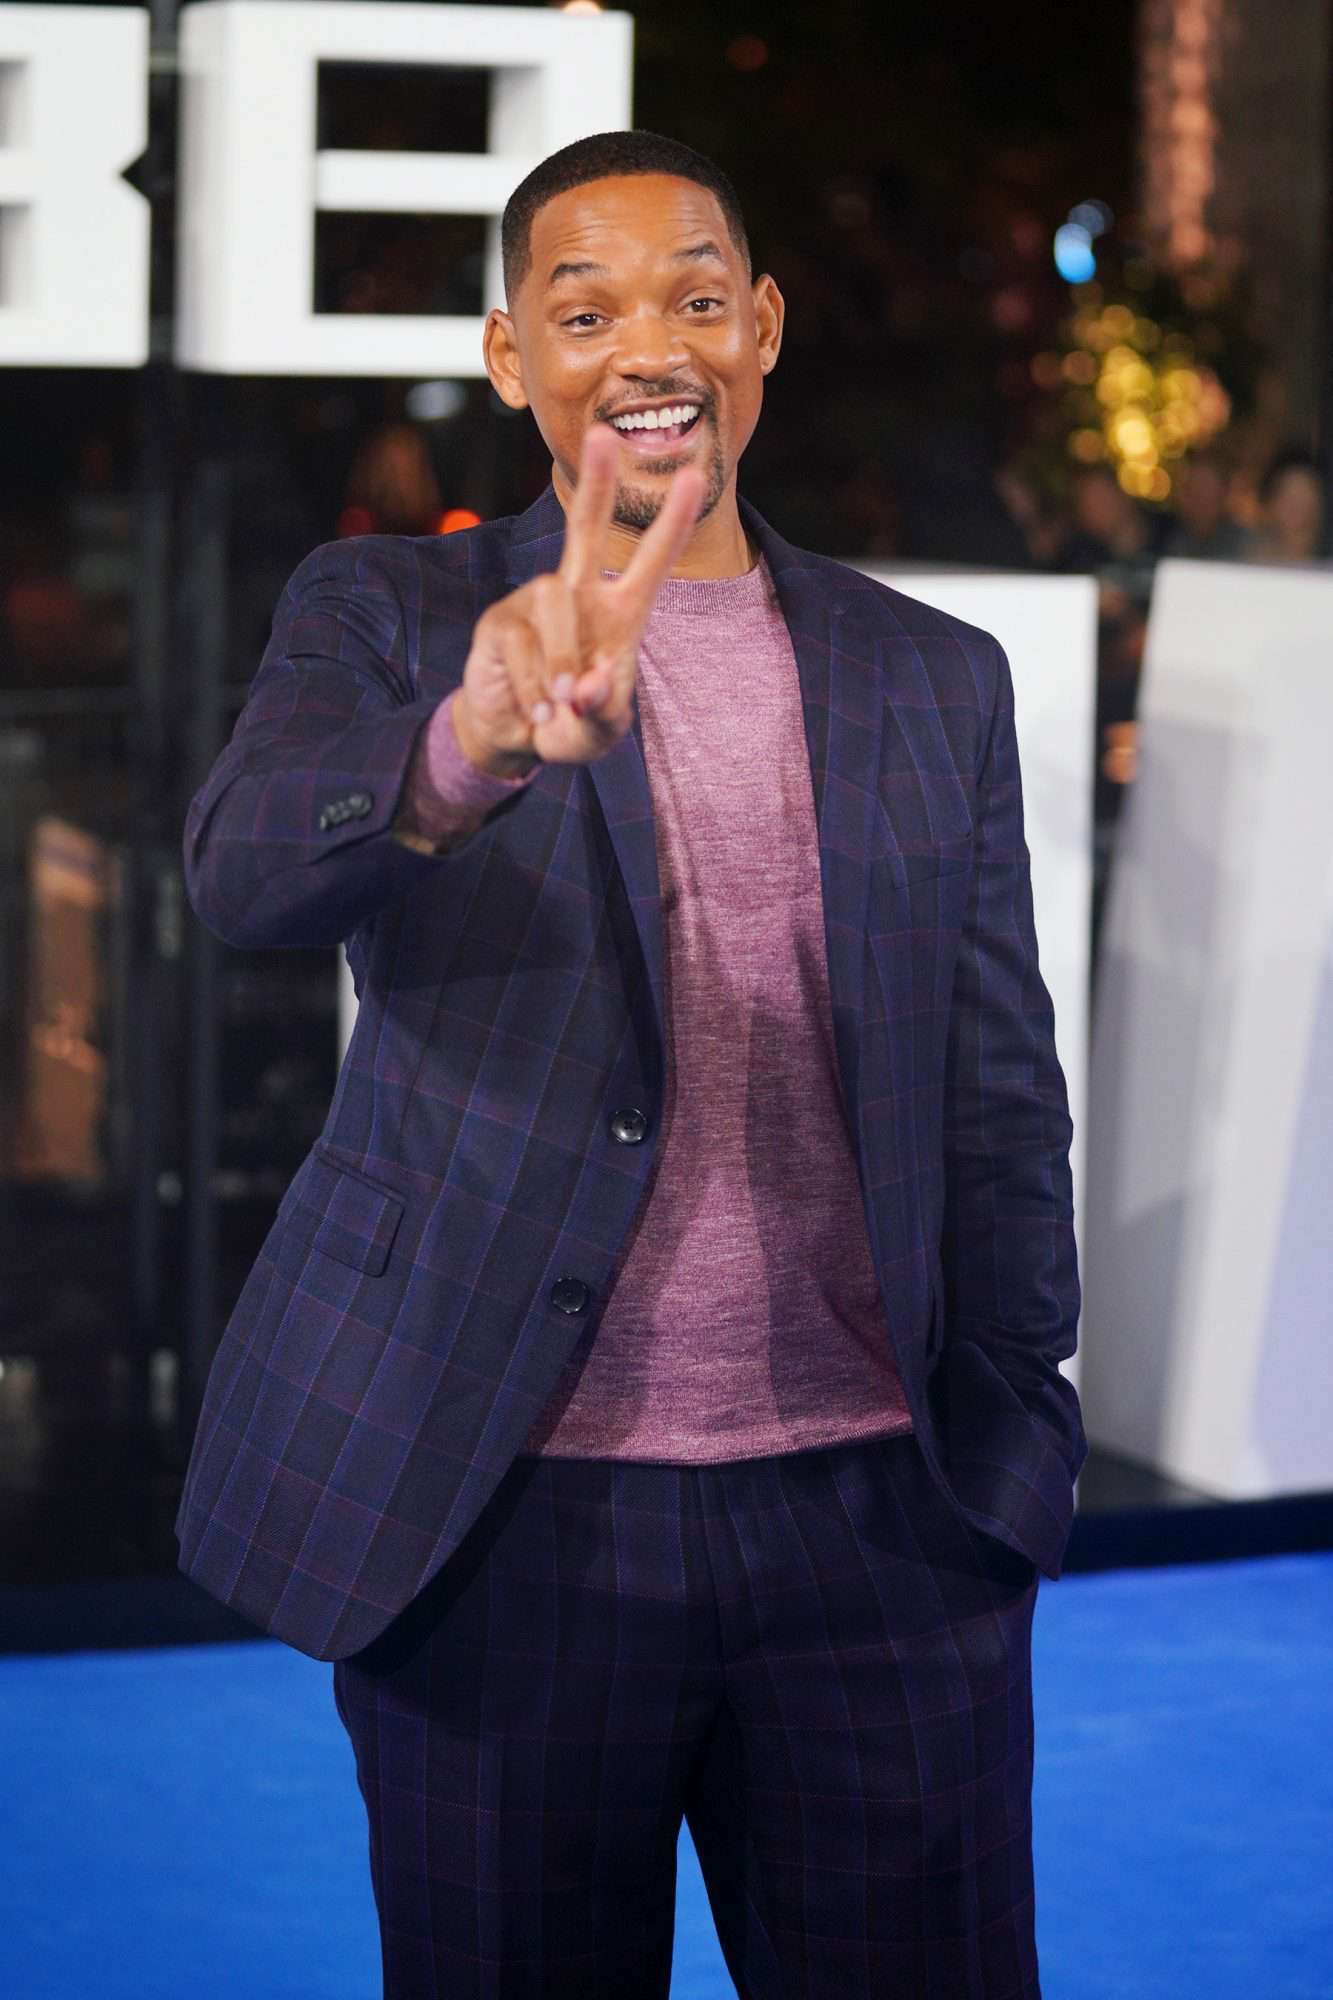 <p>Will Smith arrives at the premiere of Gemini Man on Monday in Shanghai, China.</p>
                            